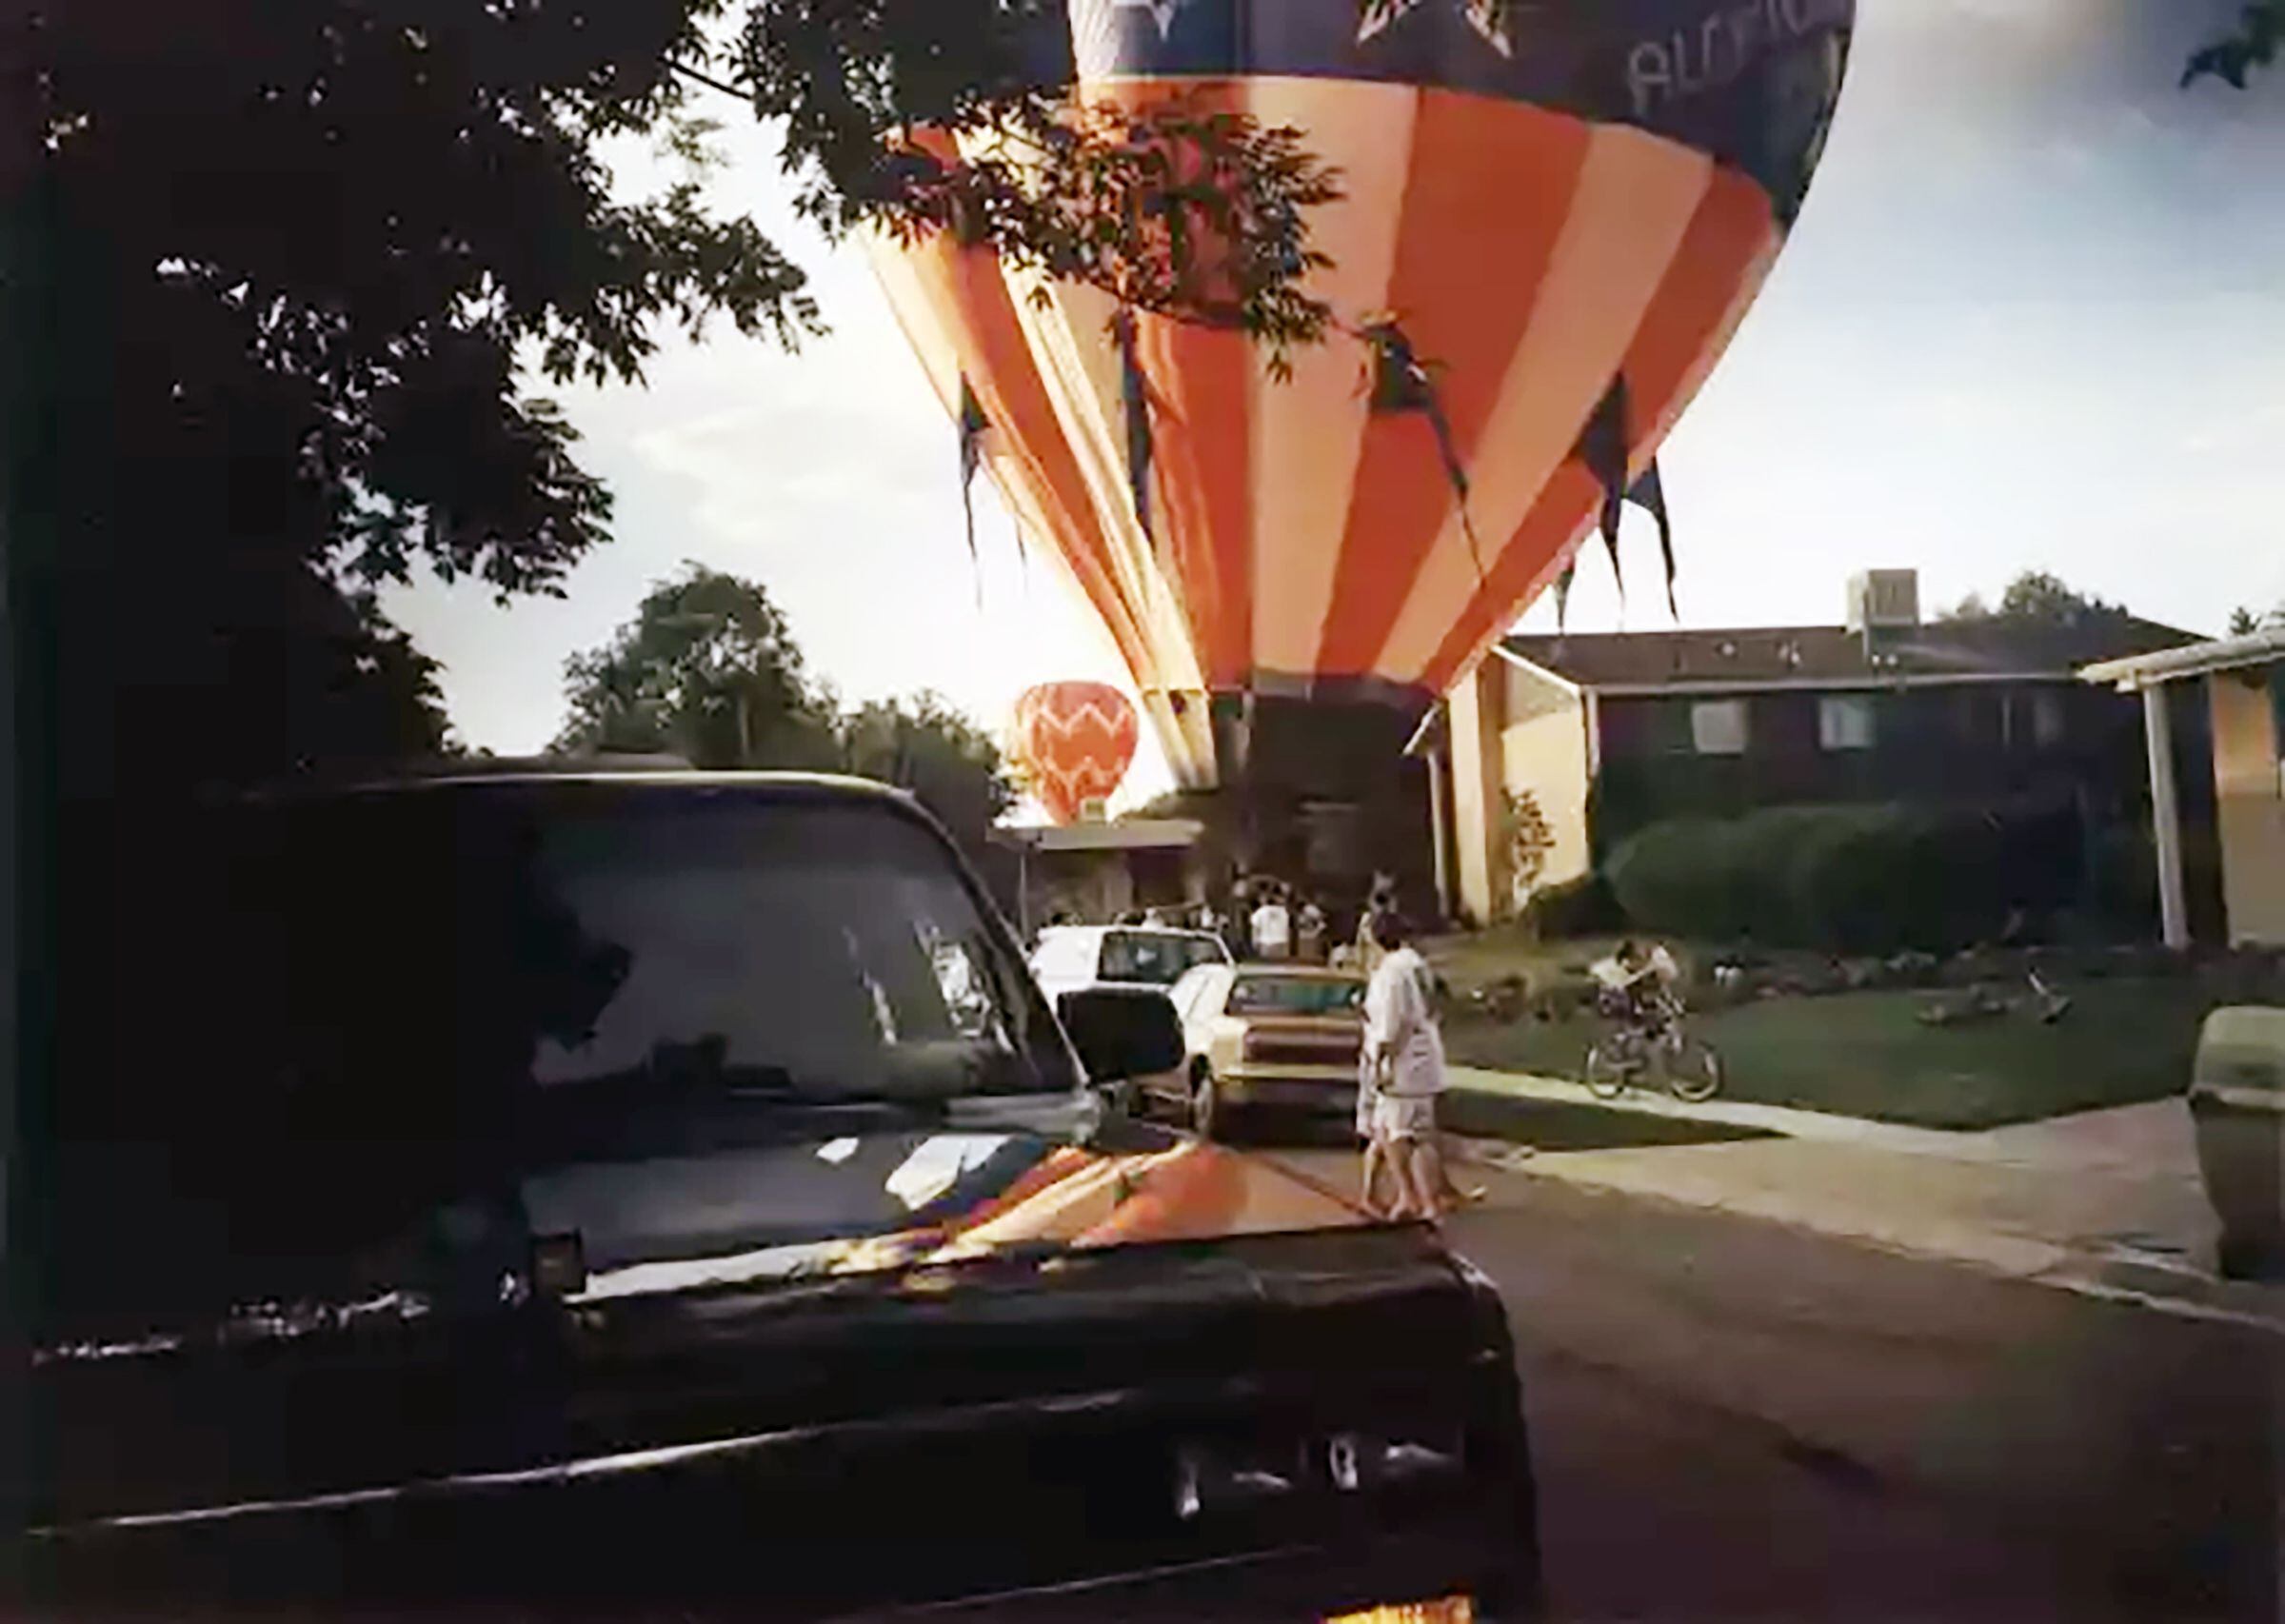 (Curt Bramble) A balloon carrying Guns N’ Roses frontman Axl Rose with Curt Bramble lands on a street in Cottonwood Heights in 1989. The balloon in the background carried Slash and other members of the band, according to Bramble.